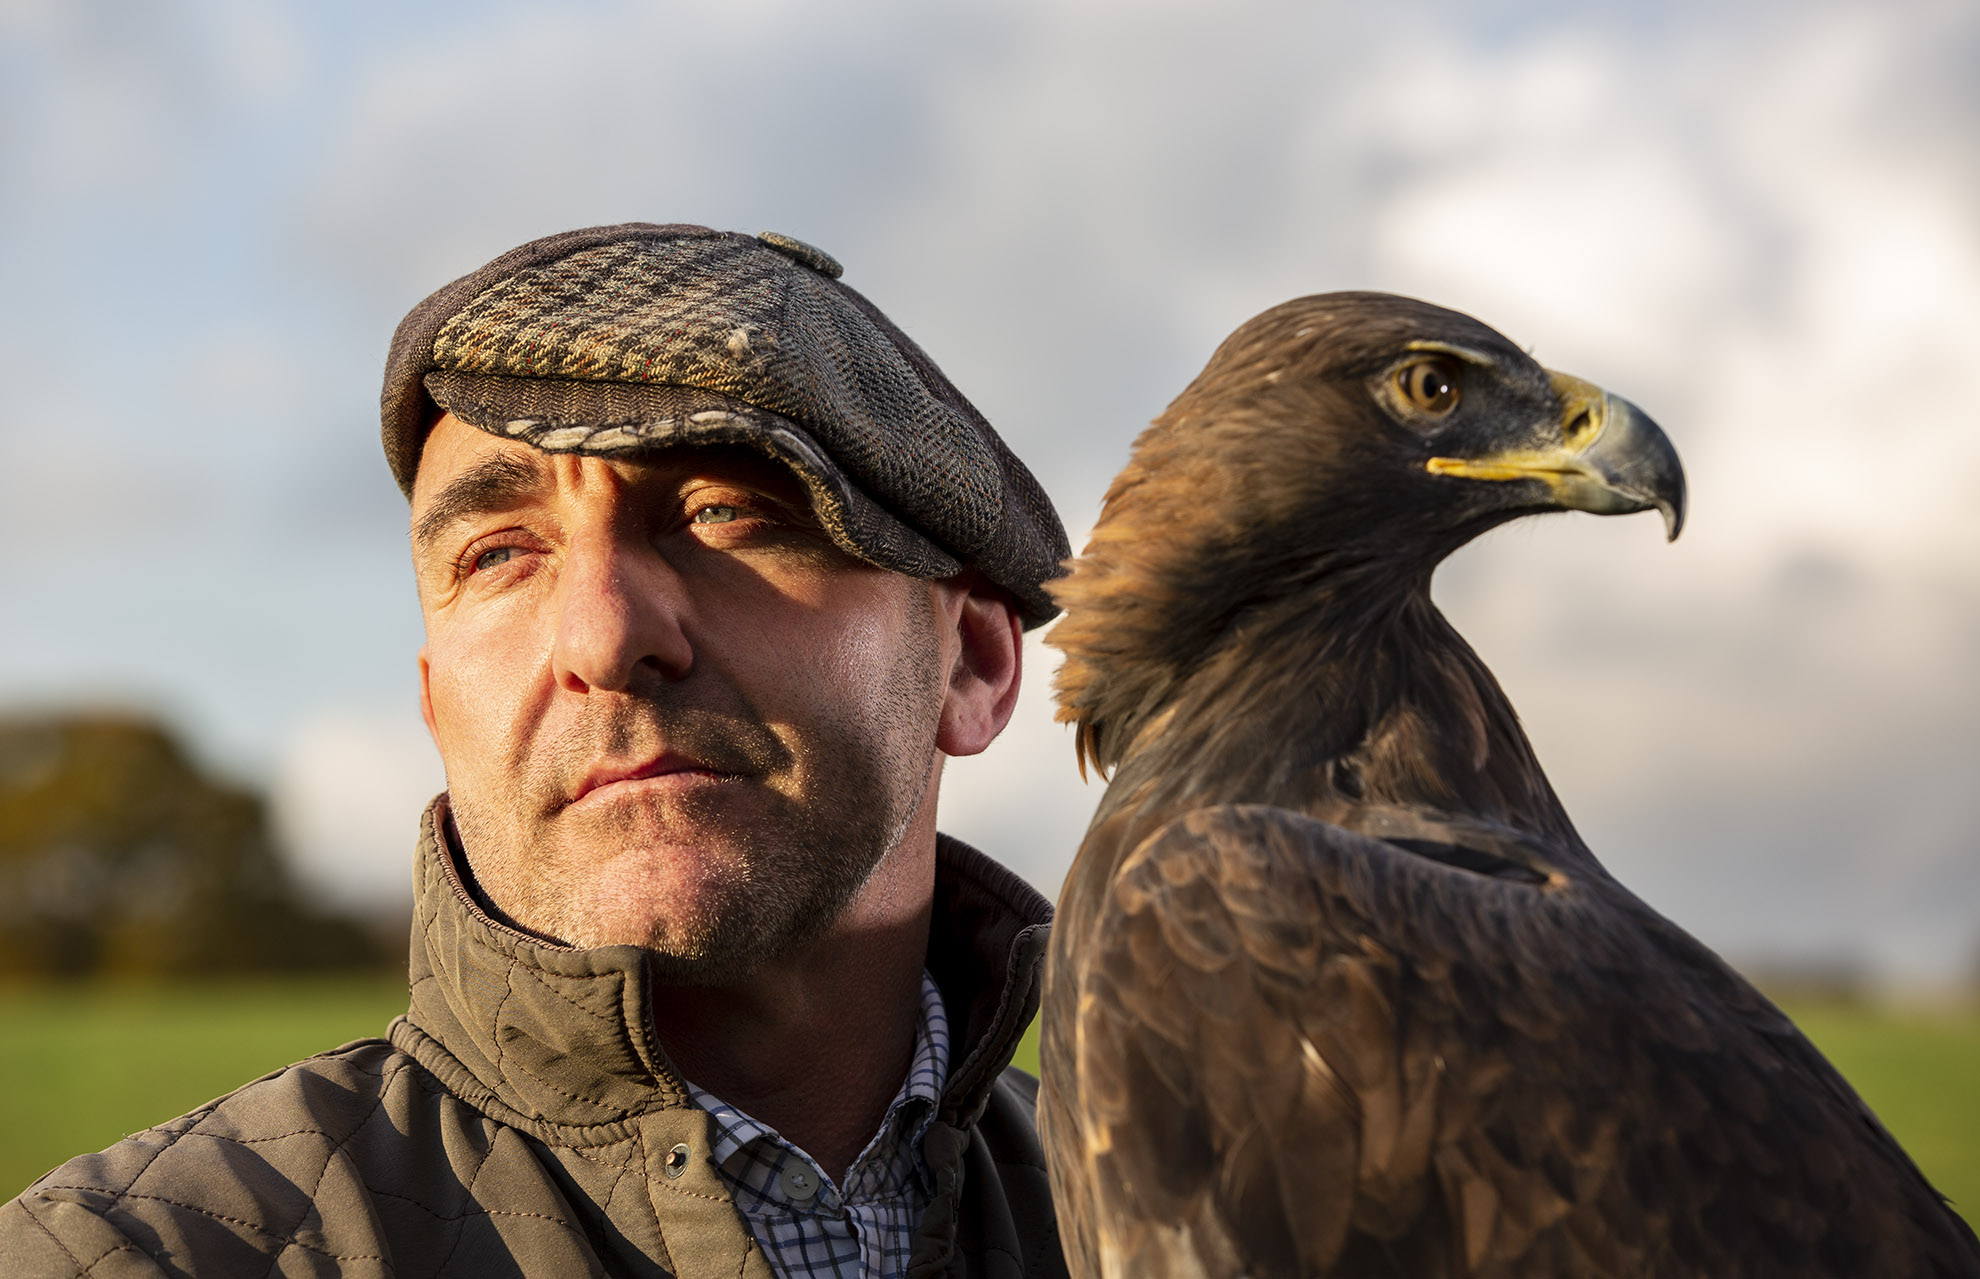  “She is bonded to me. She trusts me, and will listen out for where I am.” Falconer Chris Miller with "Skye", his Golden Eagle. 